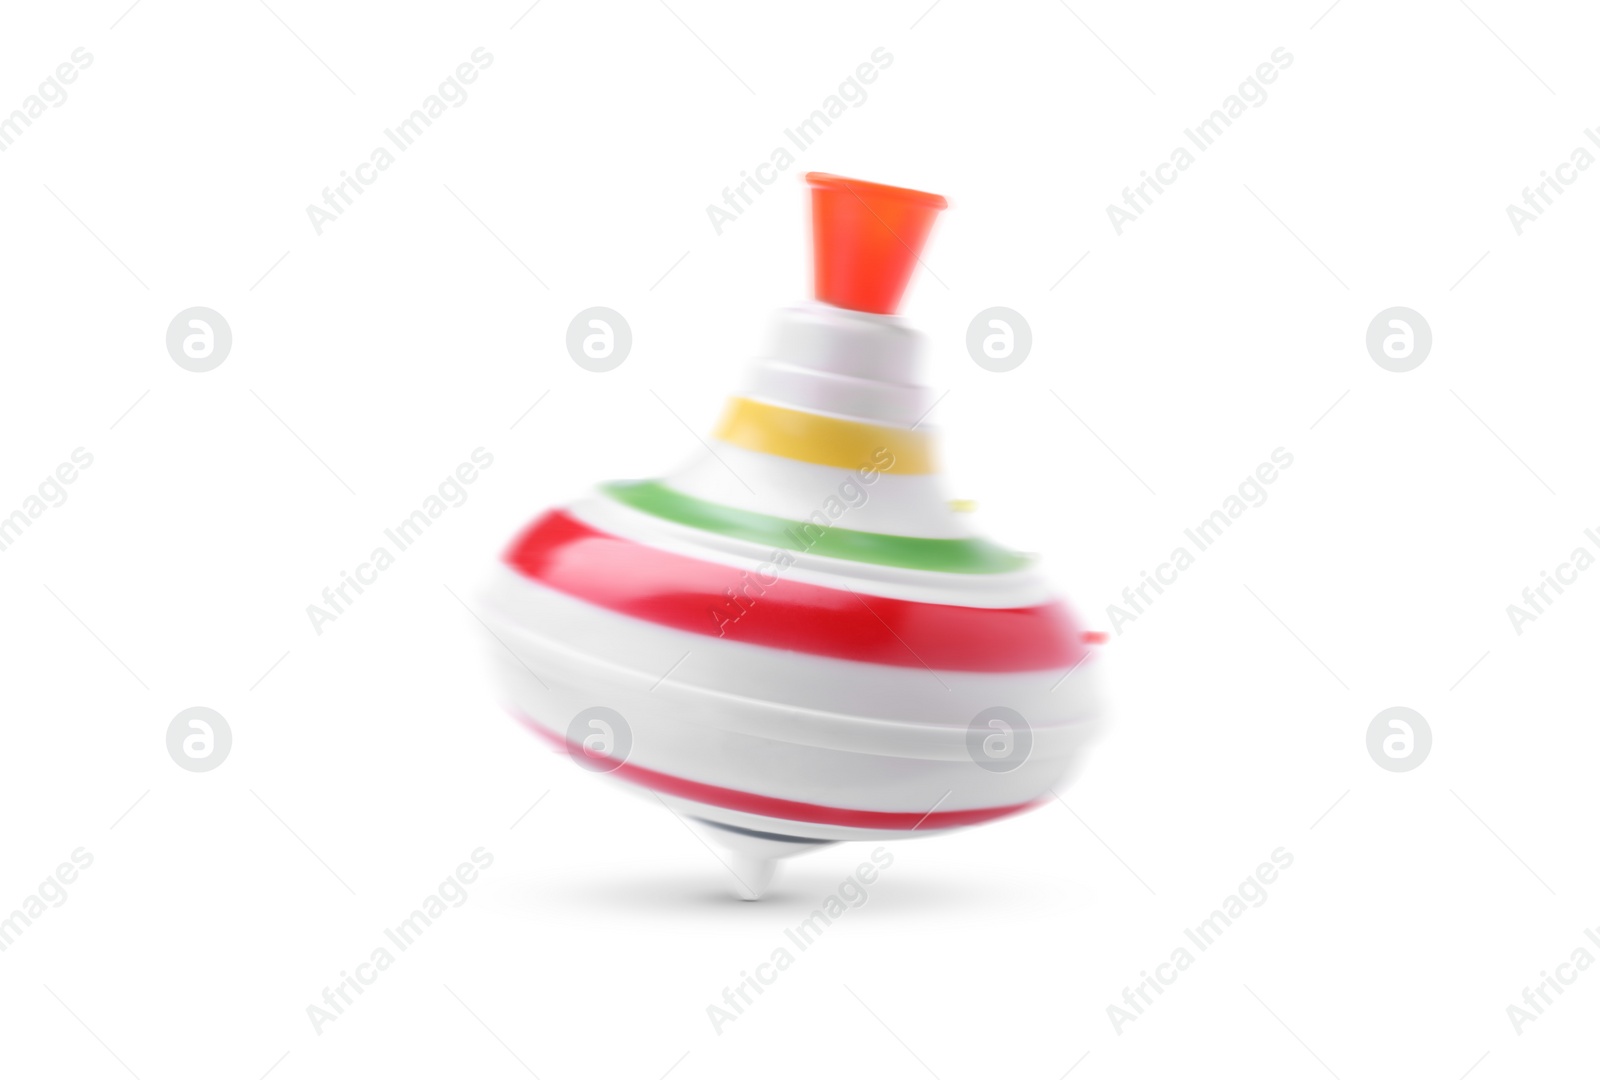 Image of One spinning top in motion on white background. Toy whirligig